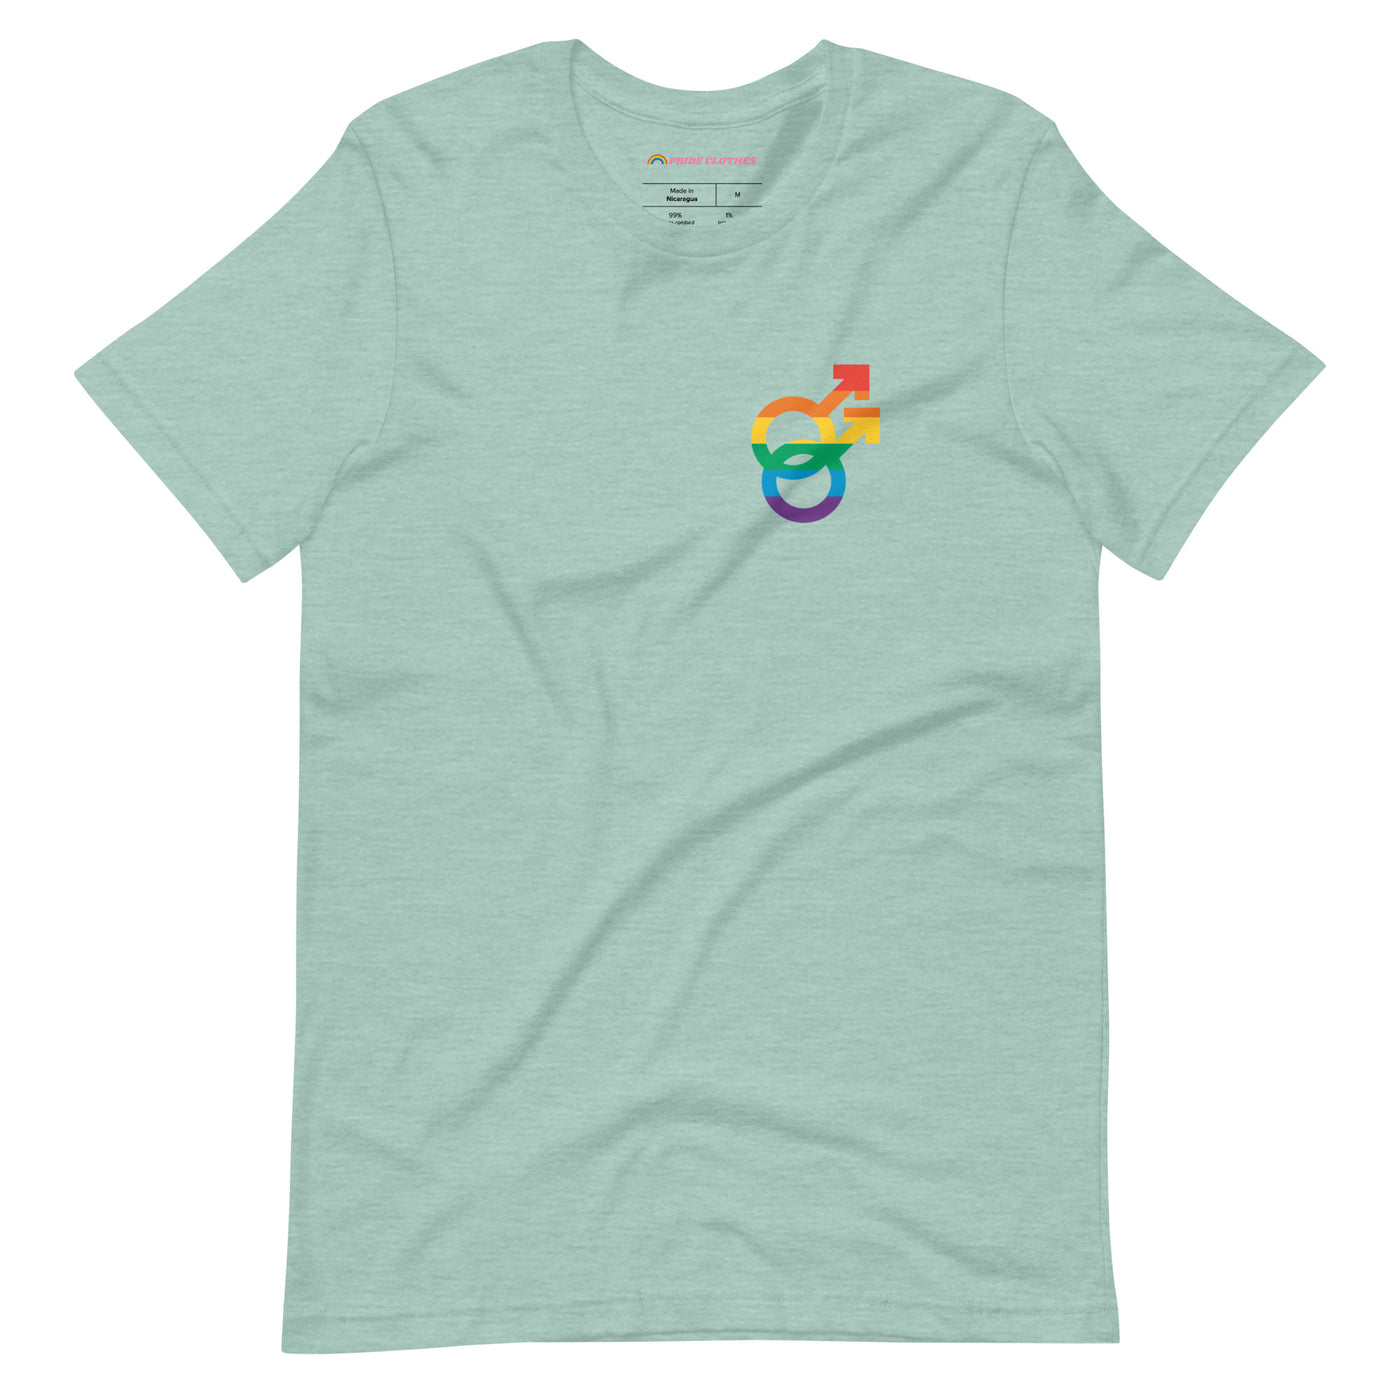 Pride Clothes - Fearlessly Express Your Truth Gay Gender Pride T-Shirt - Heather Prism Dusty Blue